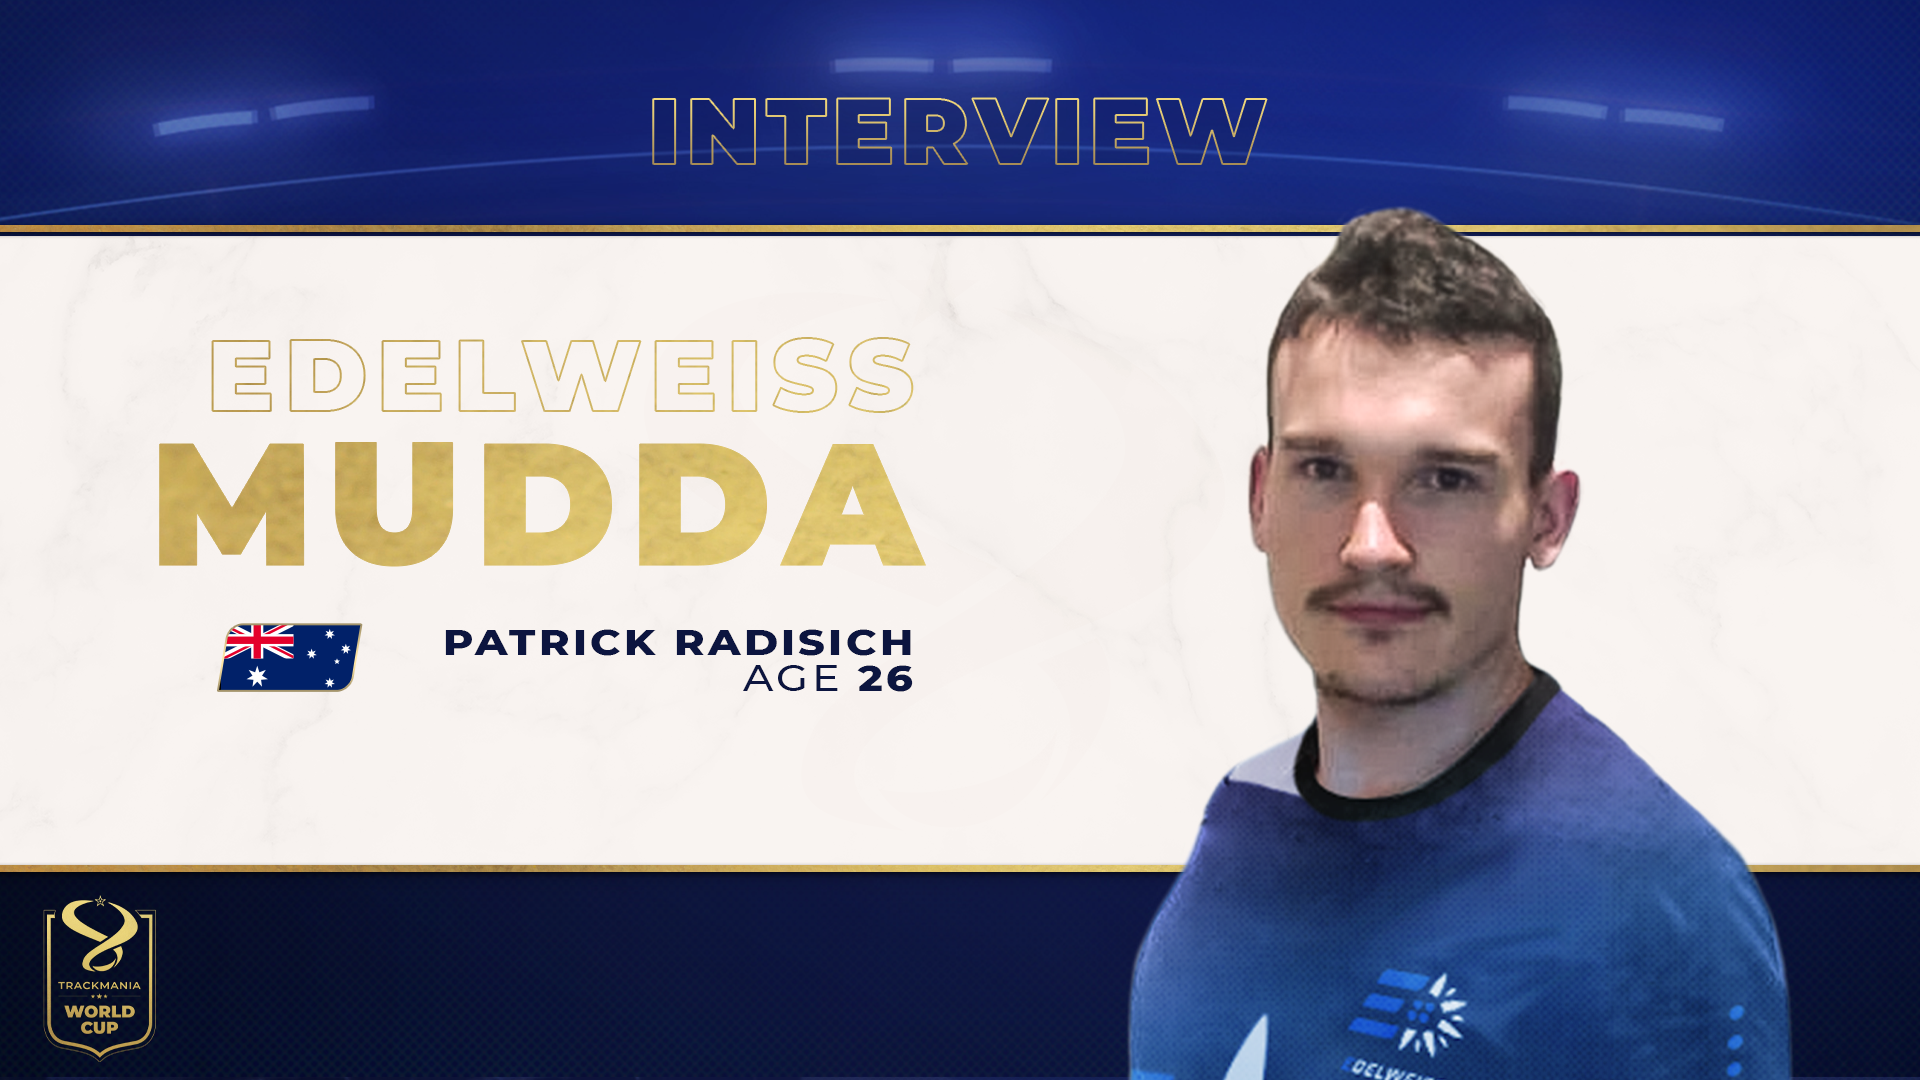 Mudda: “I have what it takes to be a world champion”